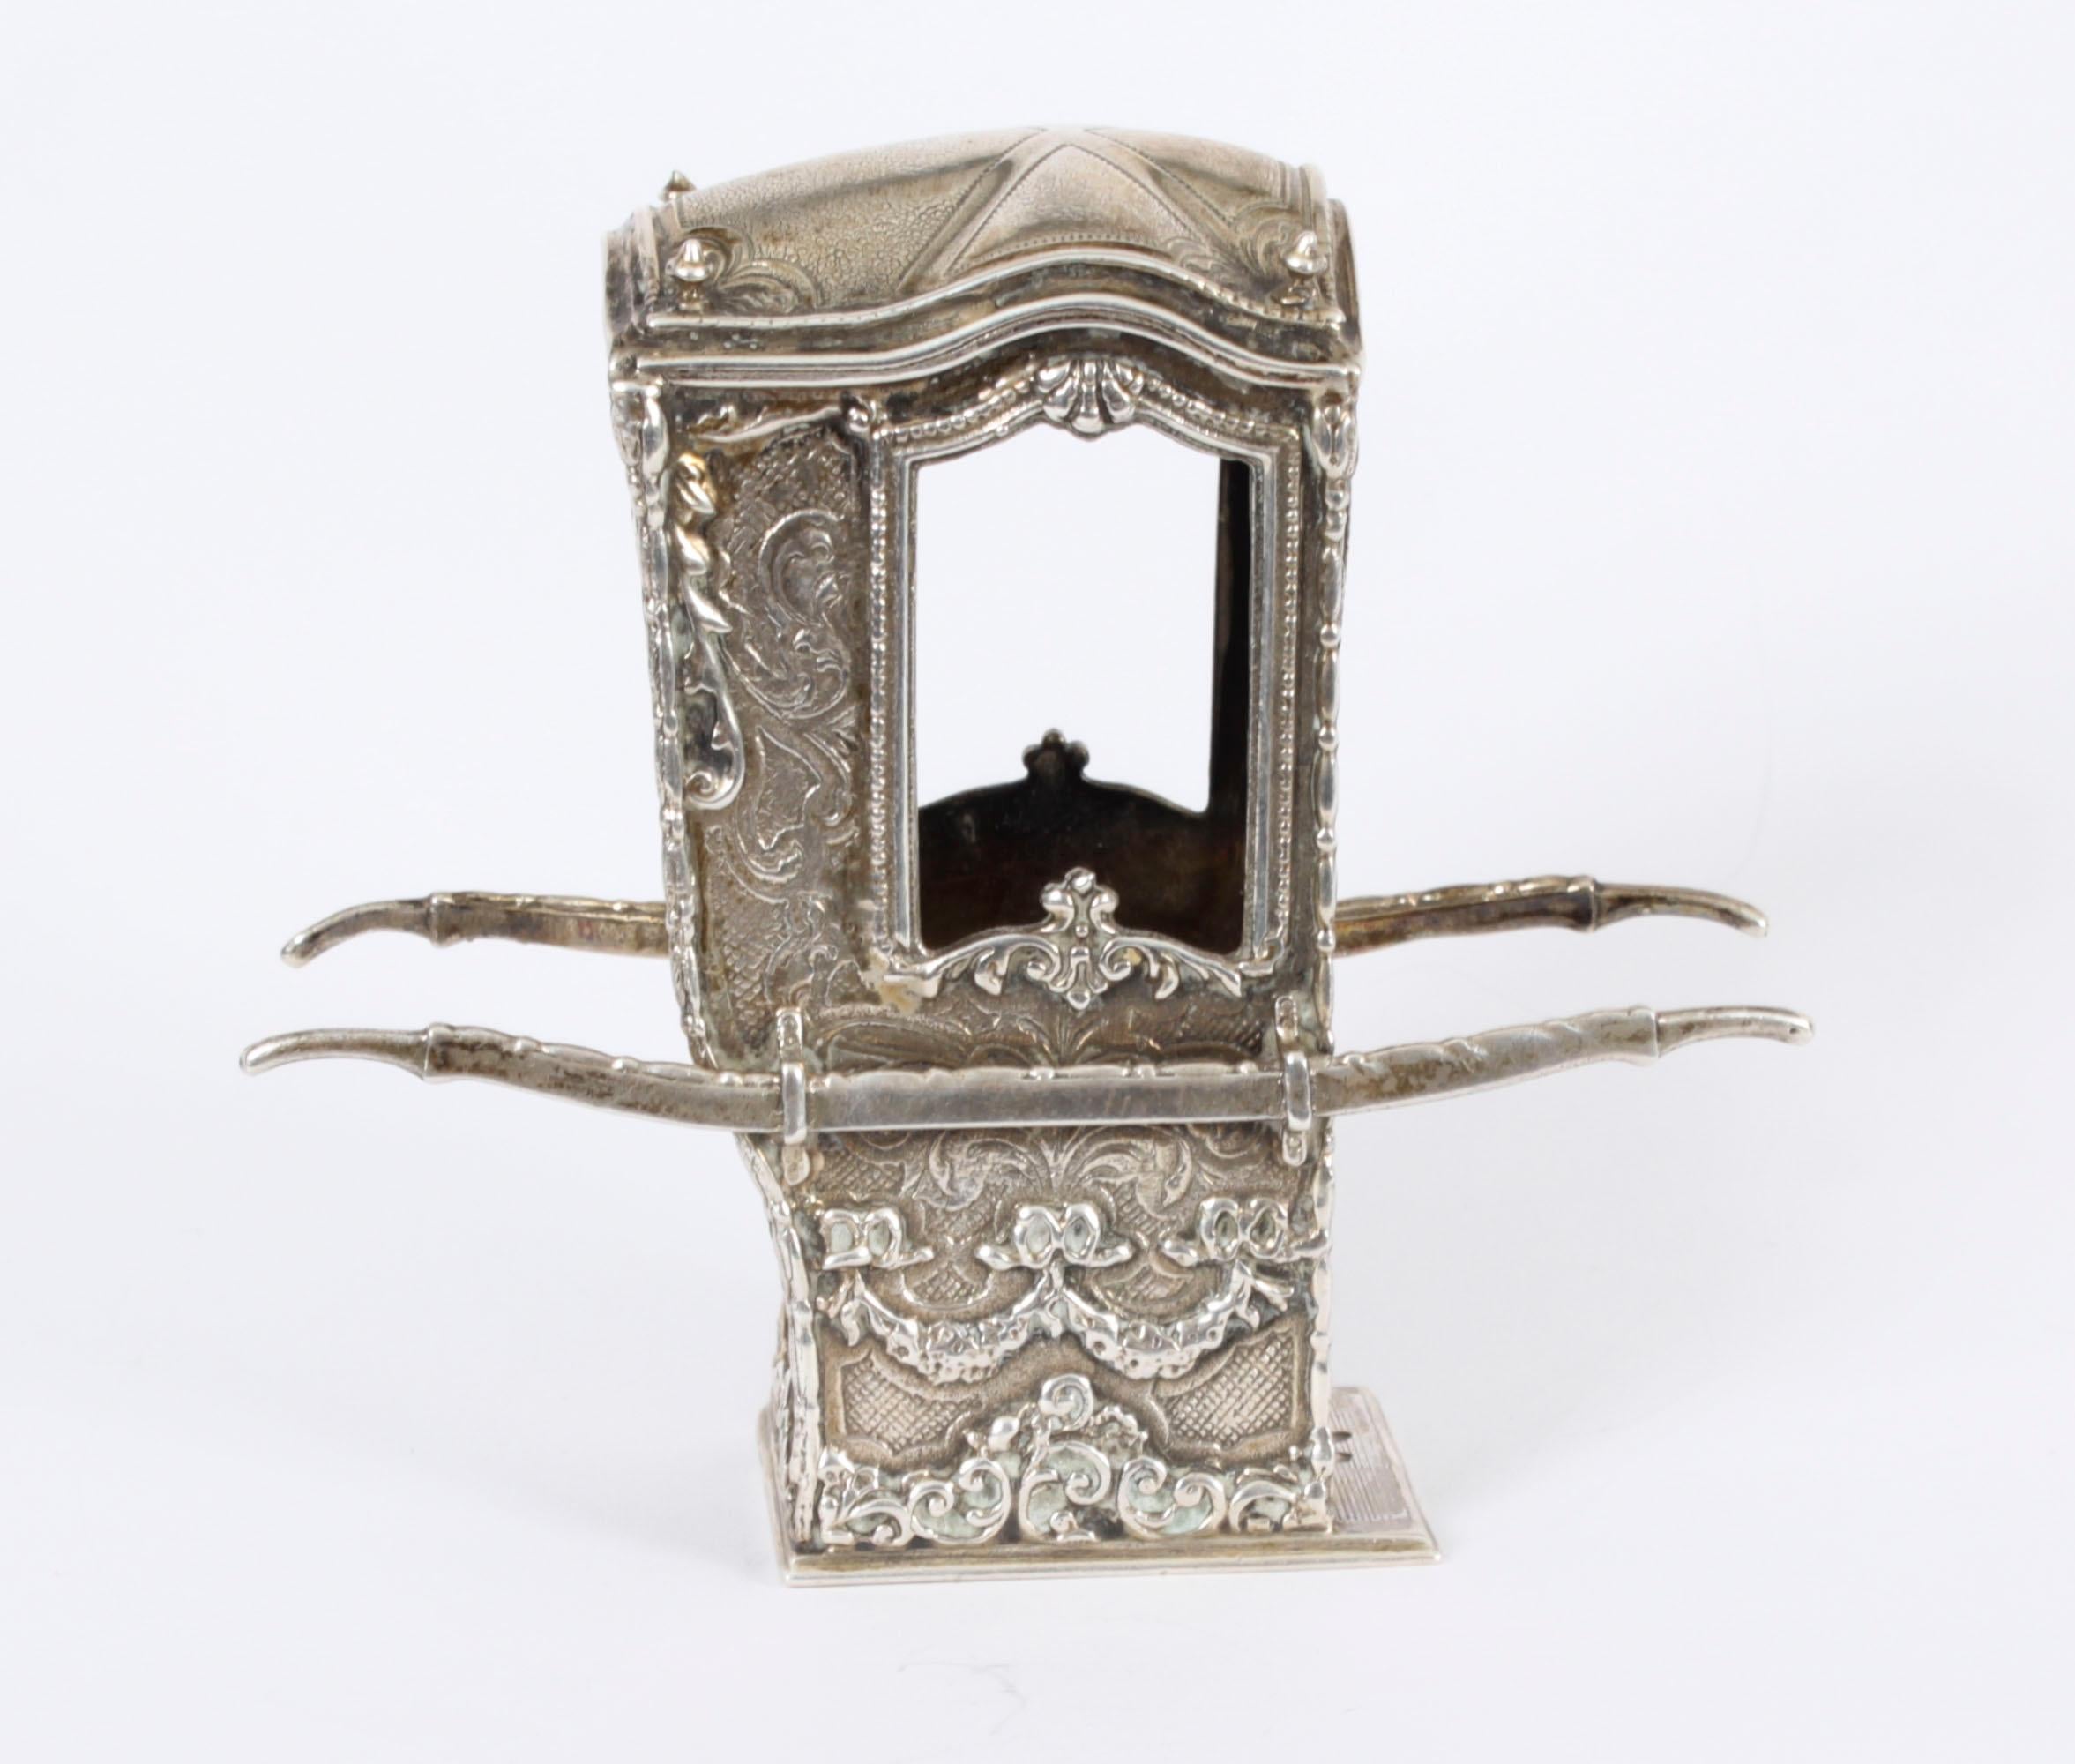 AntiqueFrench Silver Miniature Sedan Chair 19th Century In Good Condition For Sale In London, GB